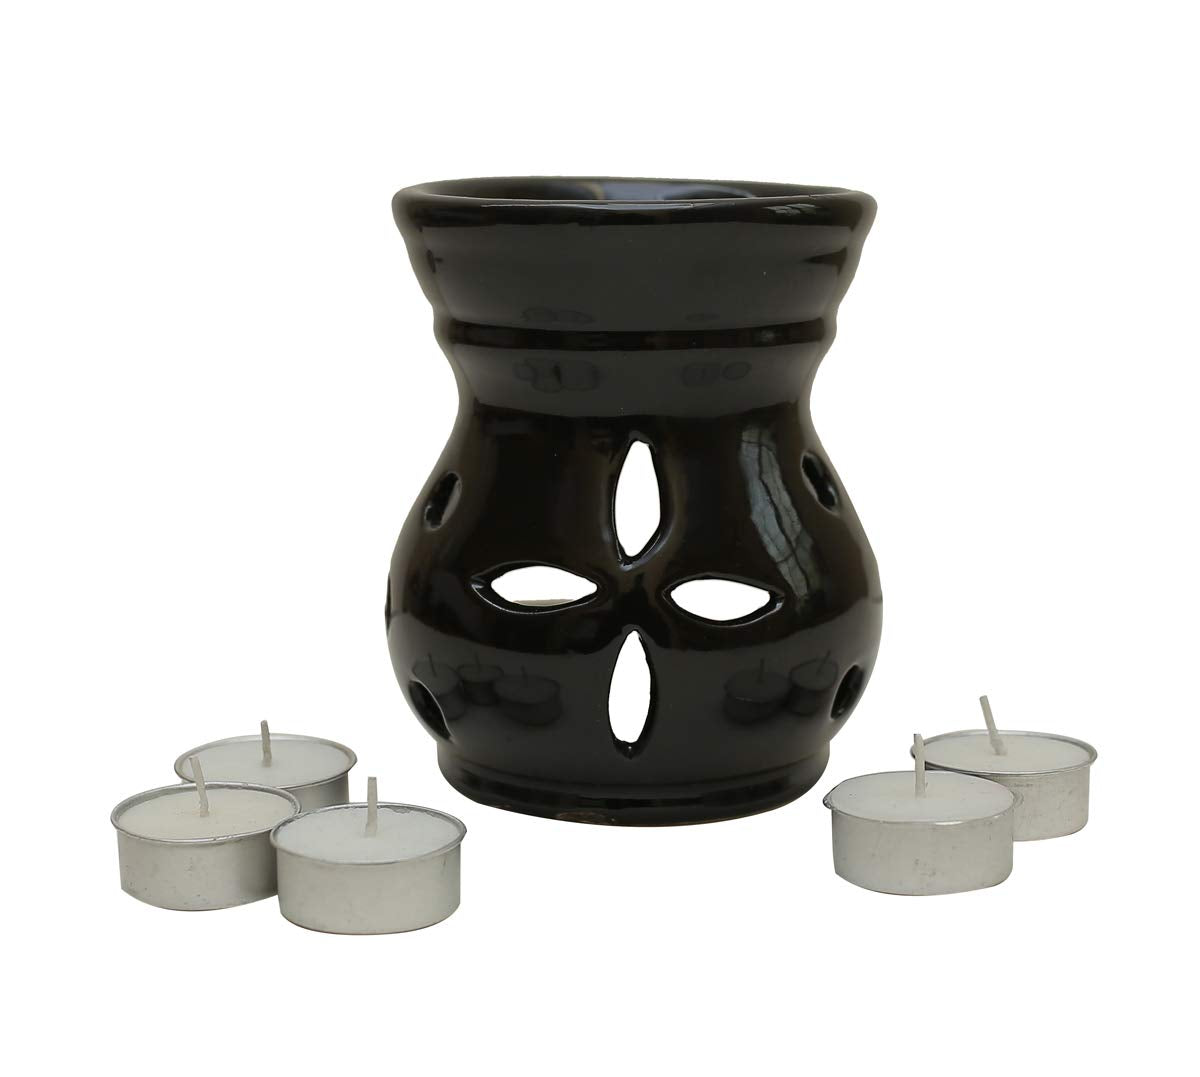 Black Ceramic Aroma Diffuser with Aroma Oil and Tealight Candle Set